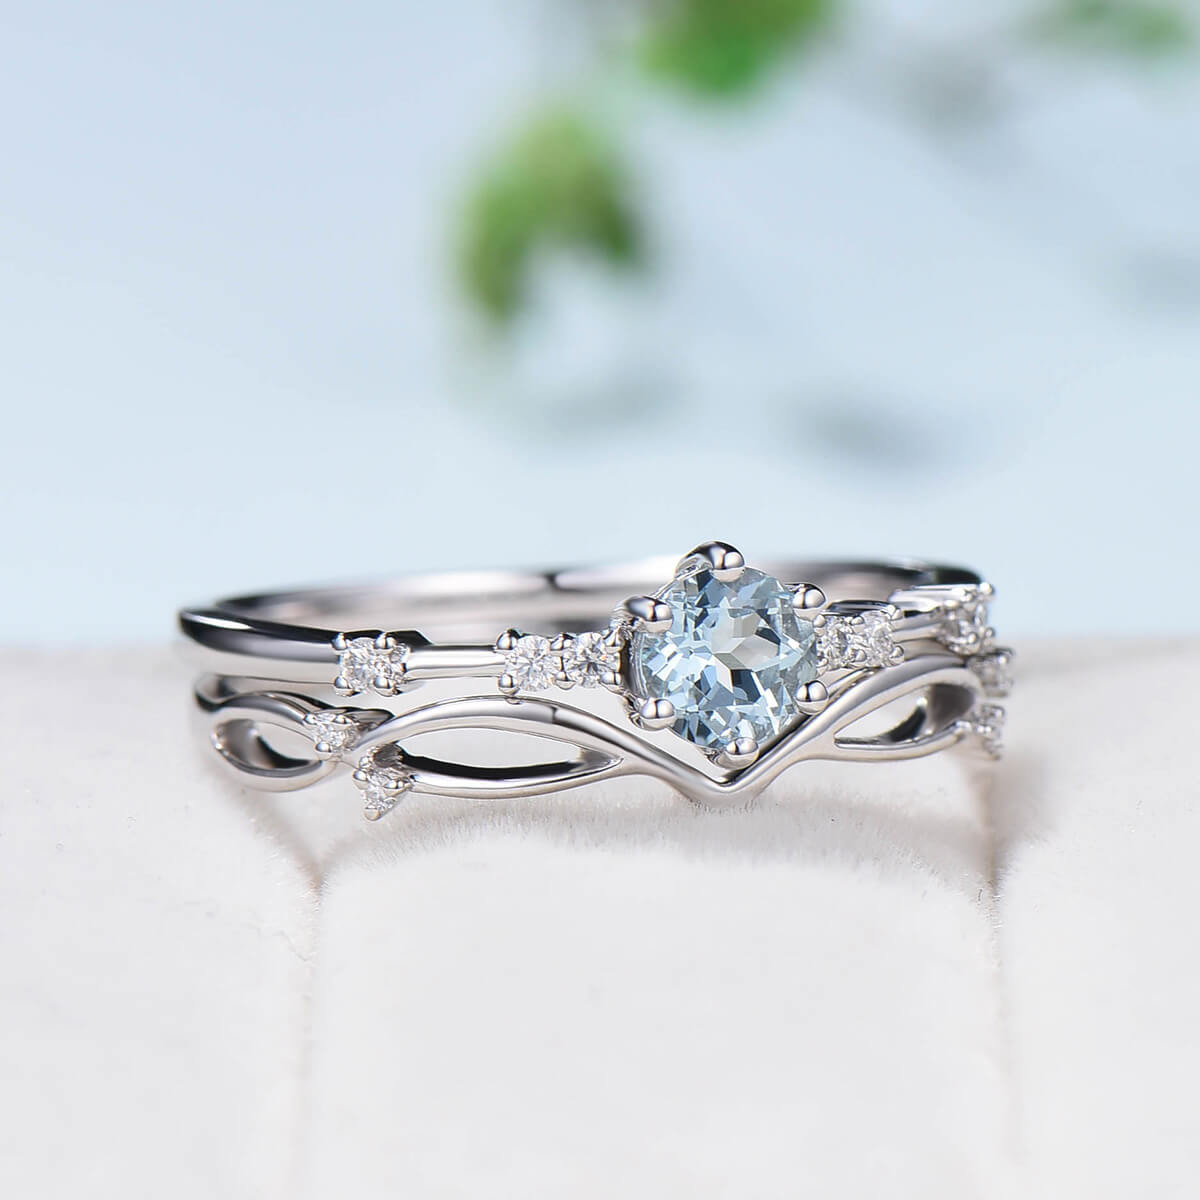 Unique & Dainty Silver Promises Rings Handcrafted with Love – YourAsteria